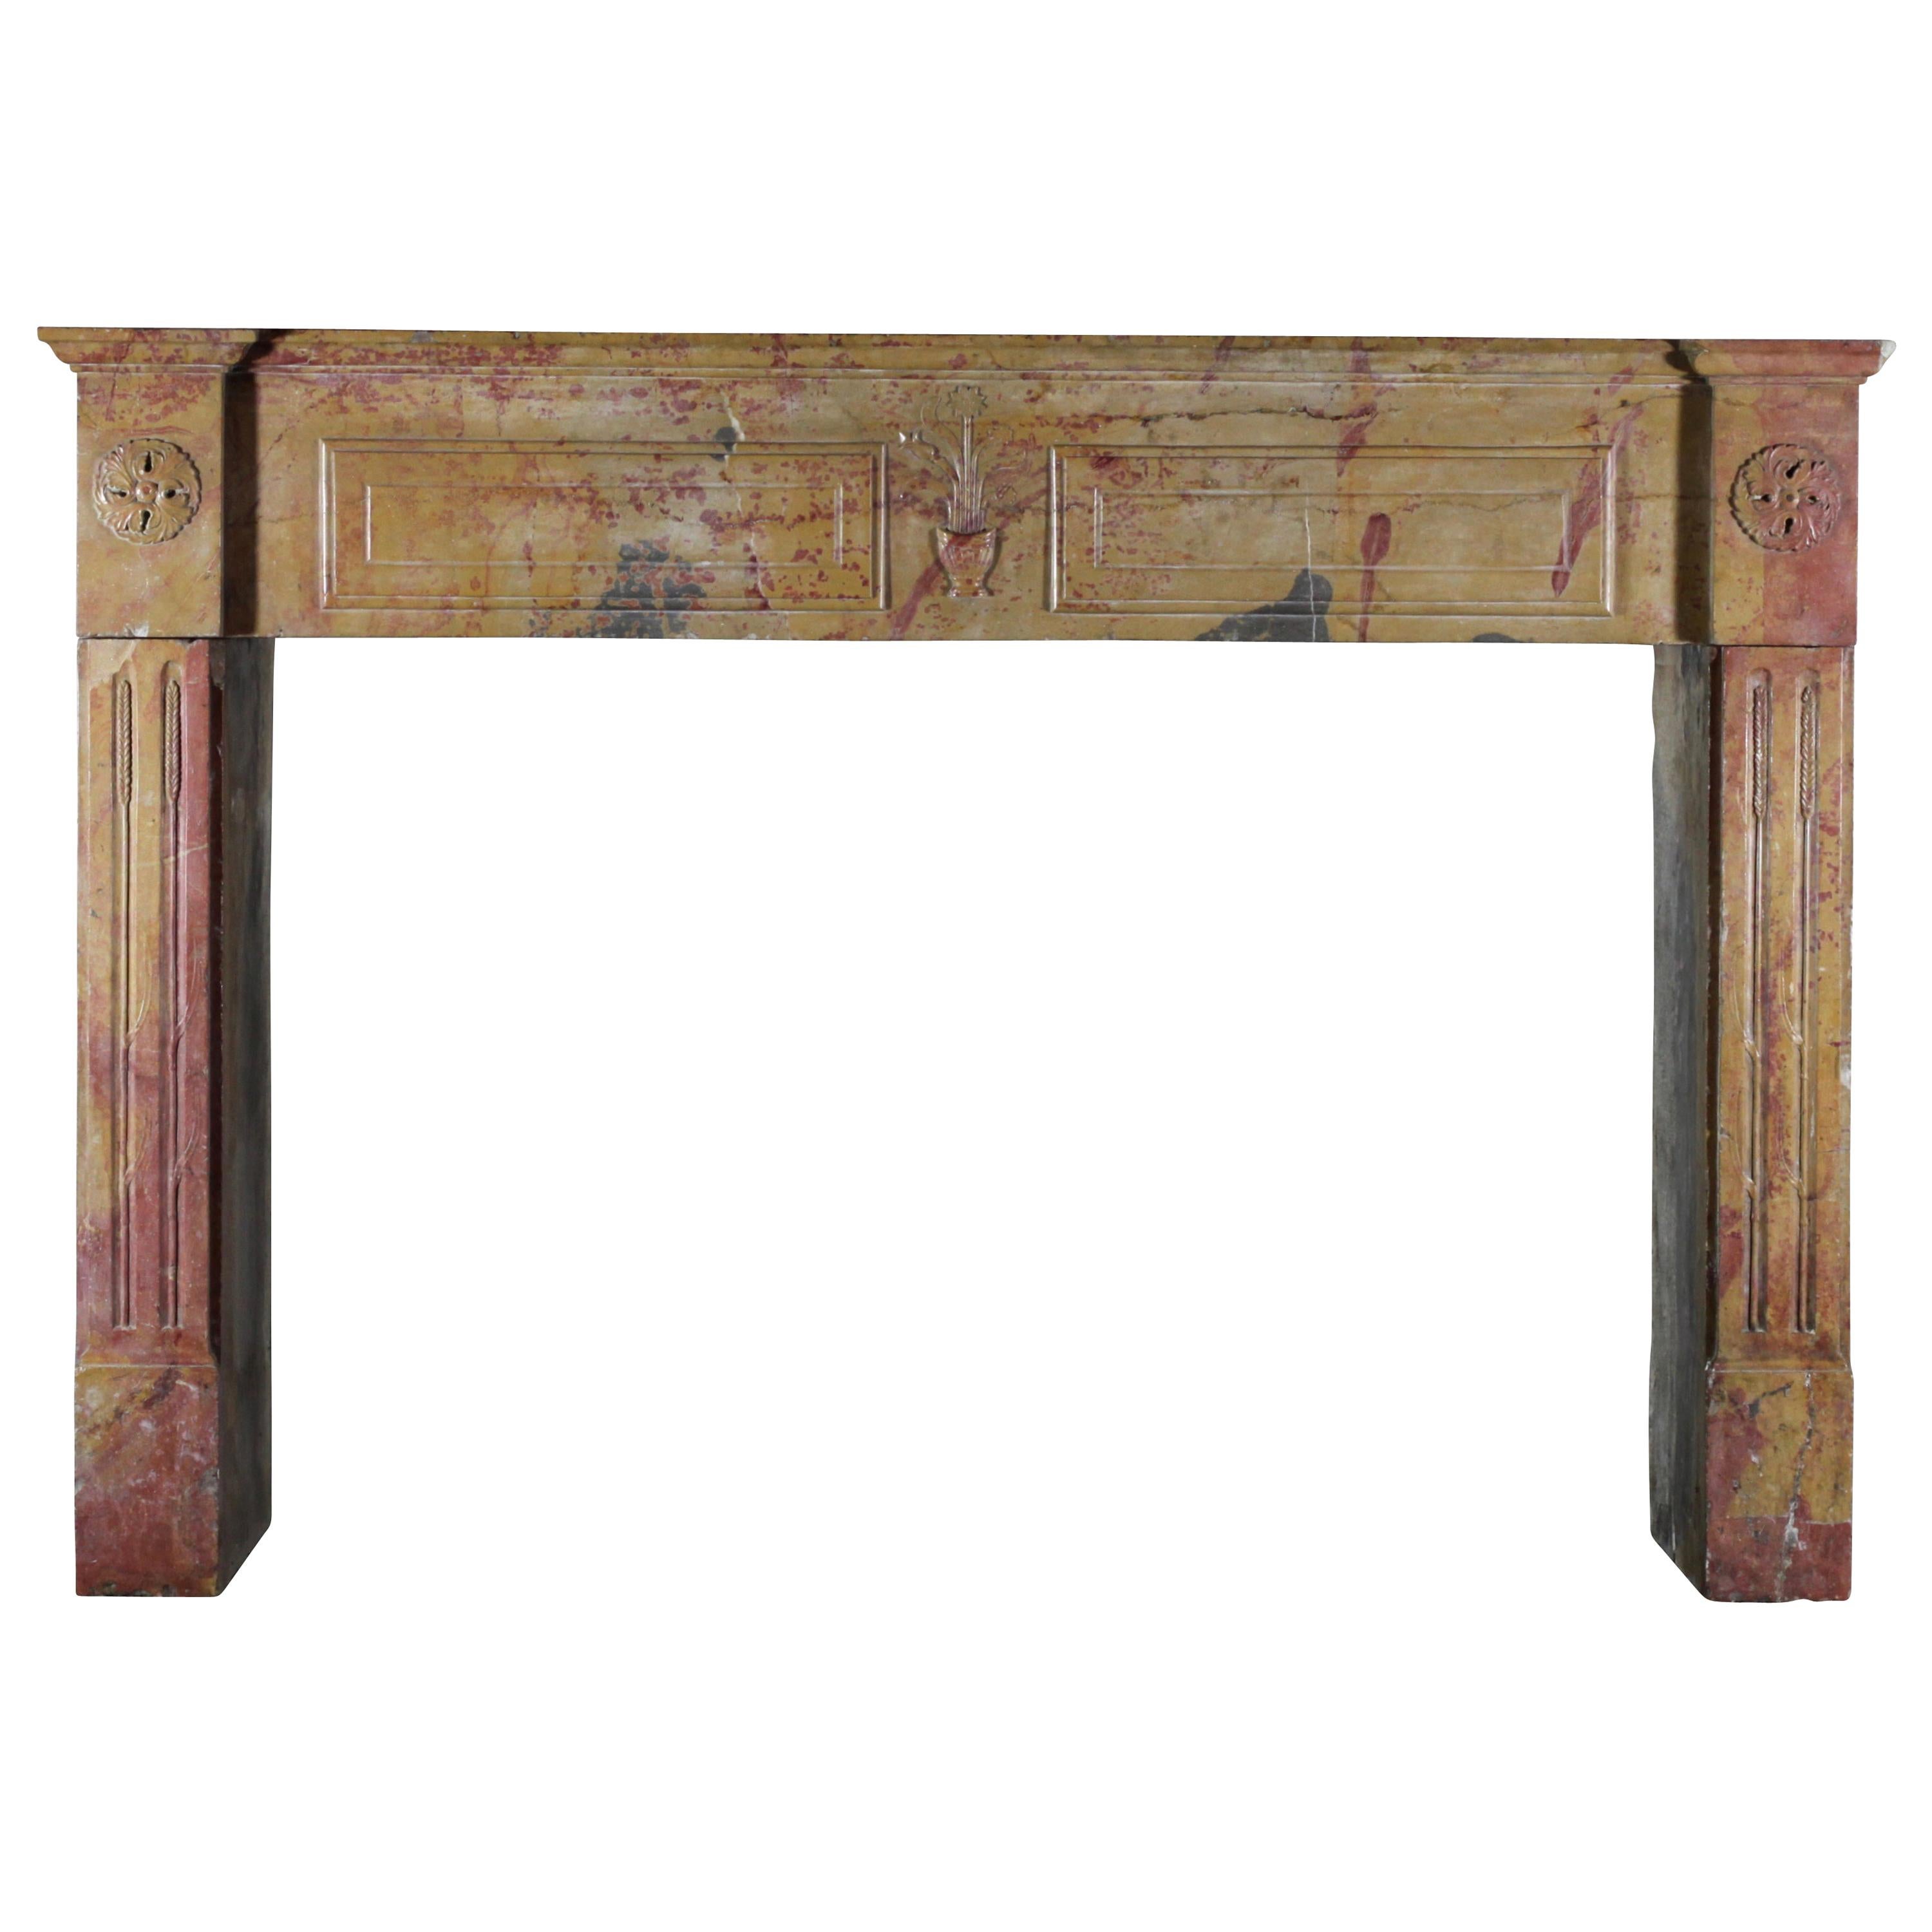 Original French Directoire Period Vintage Fireplace Surround Designed by Nature For Sale